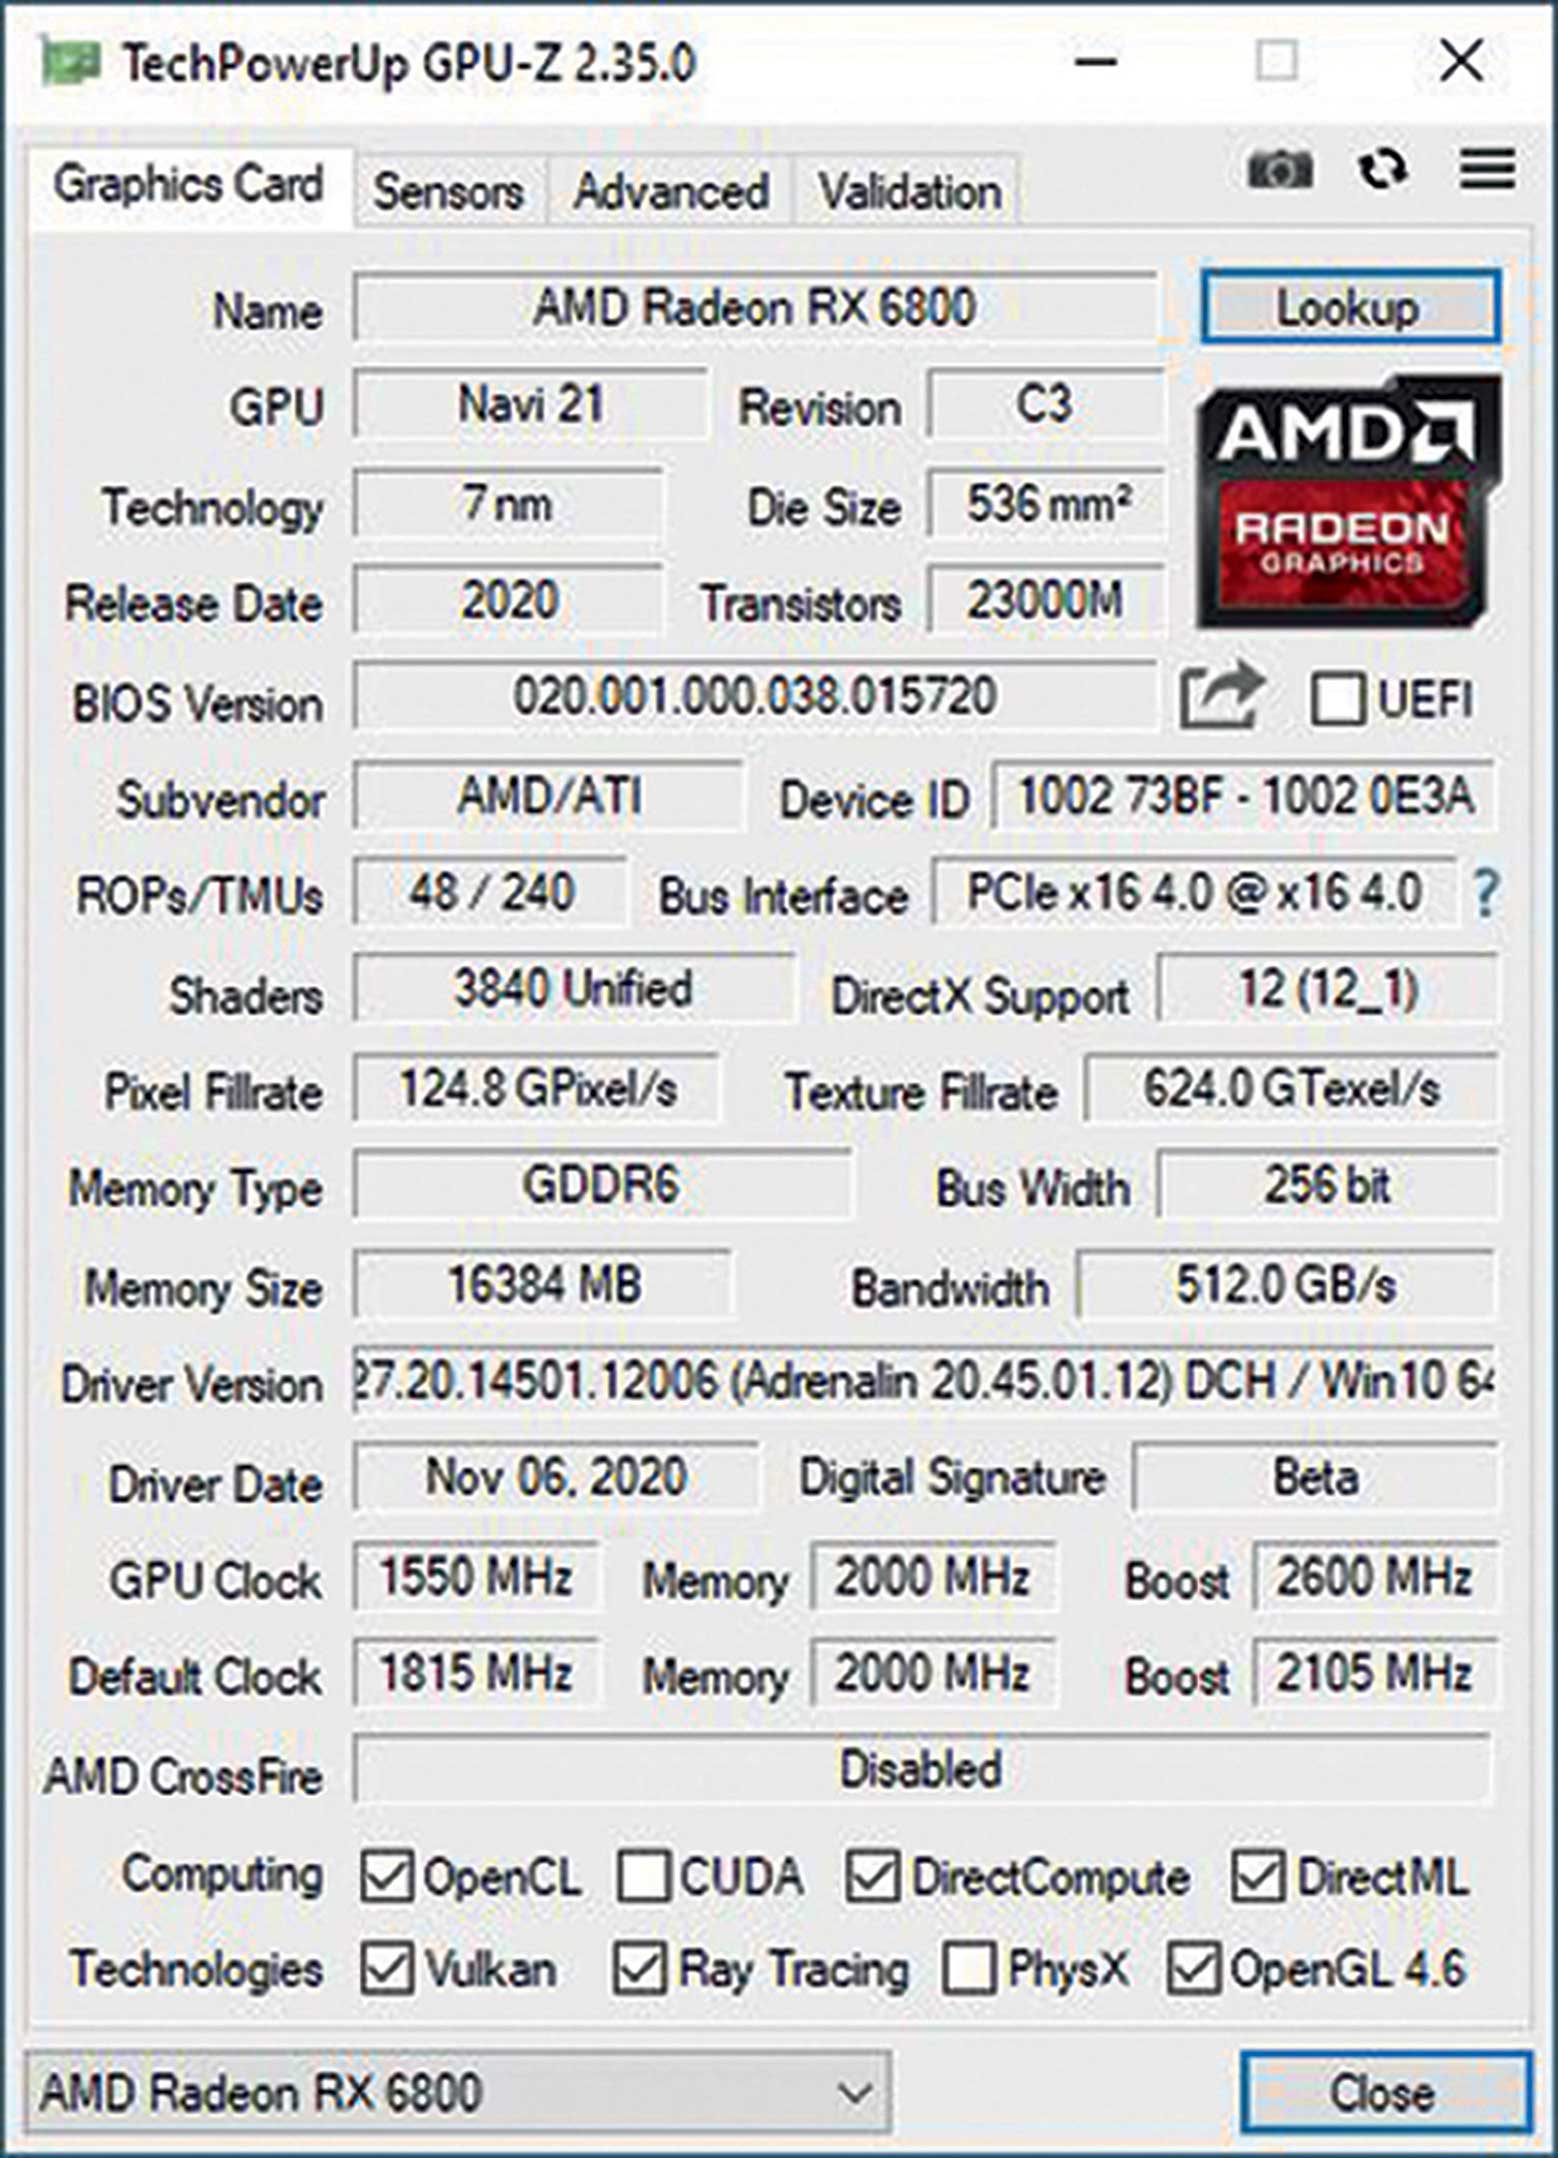 rx6800 boost 2600 mhz